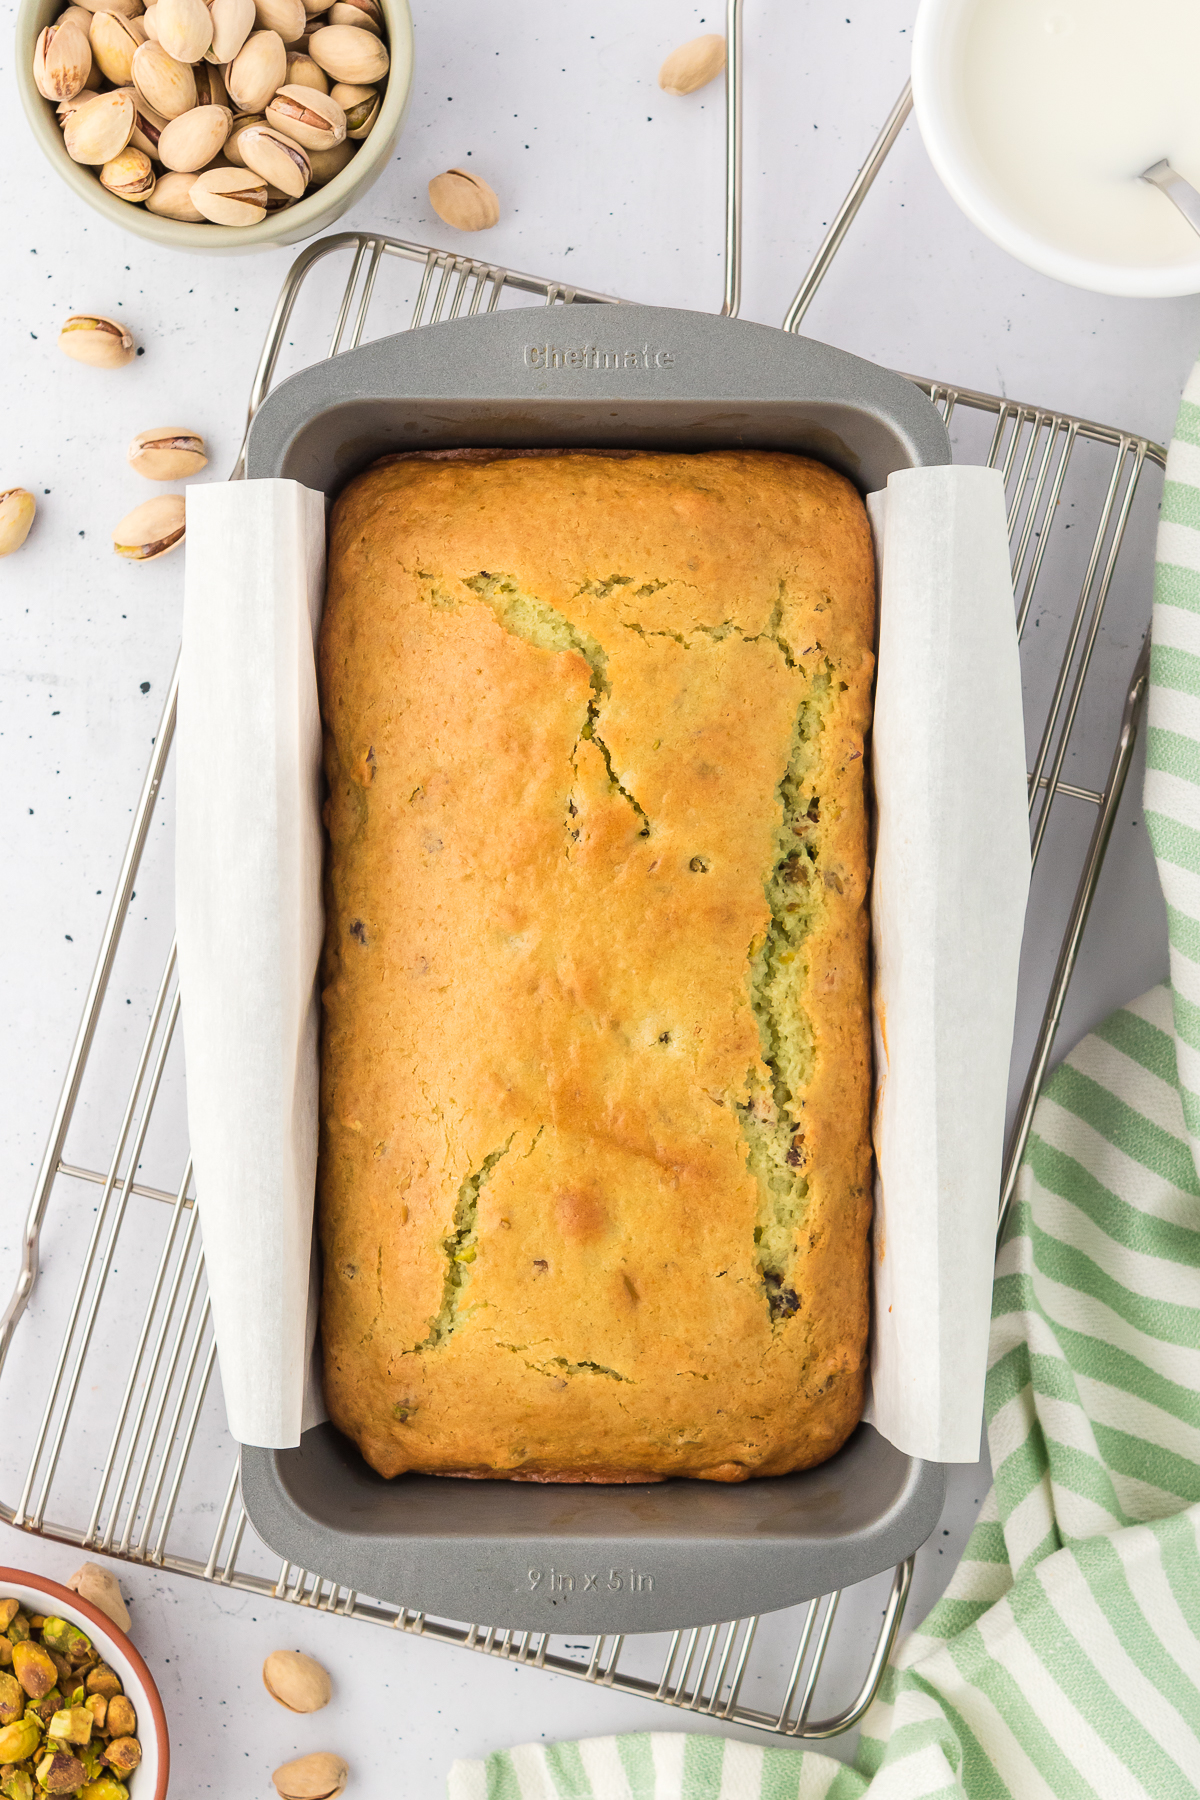 baked pistachio loaf bread in loaf pan